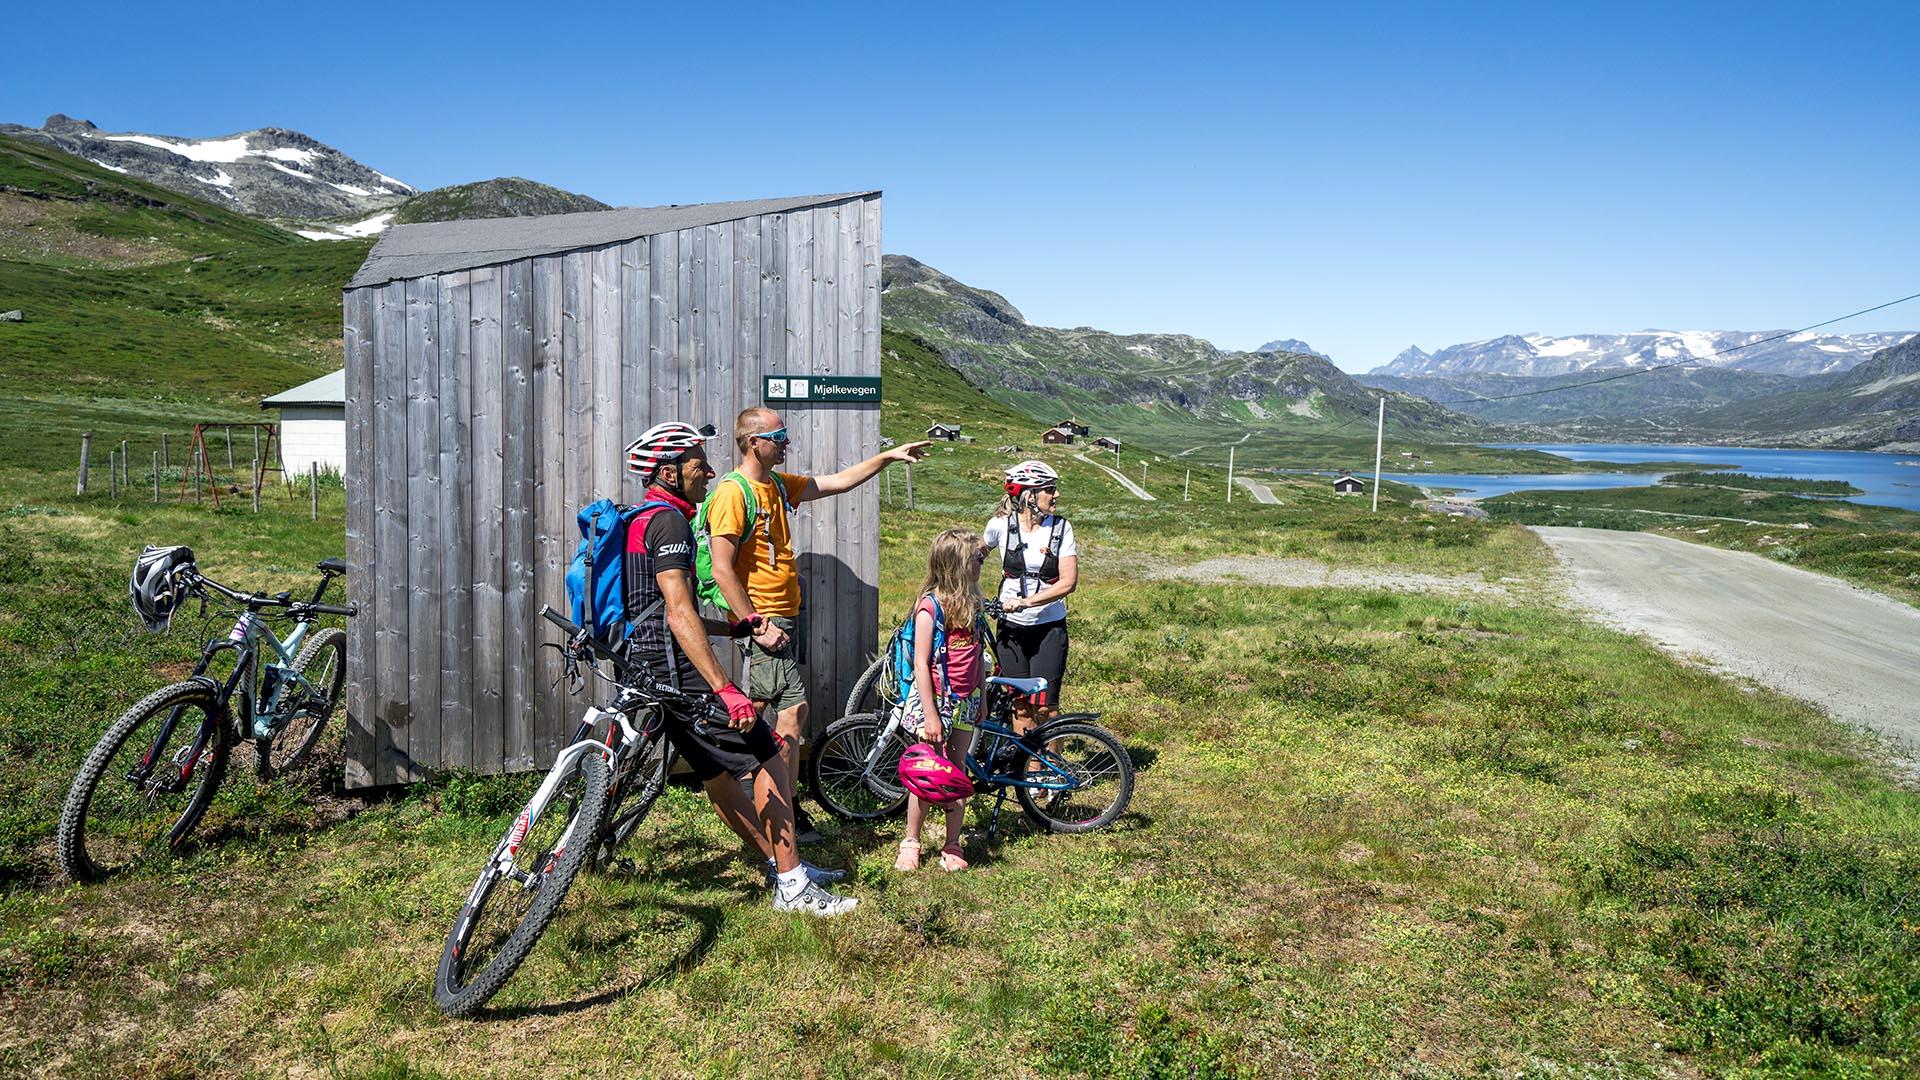 Cyclists taking a break at a rest shelter along a farm road in the mountains with view to a lake and high peaks.